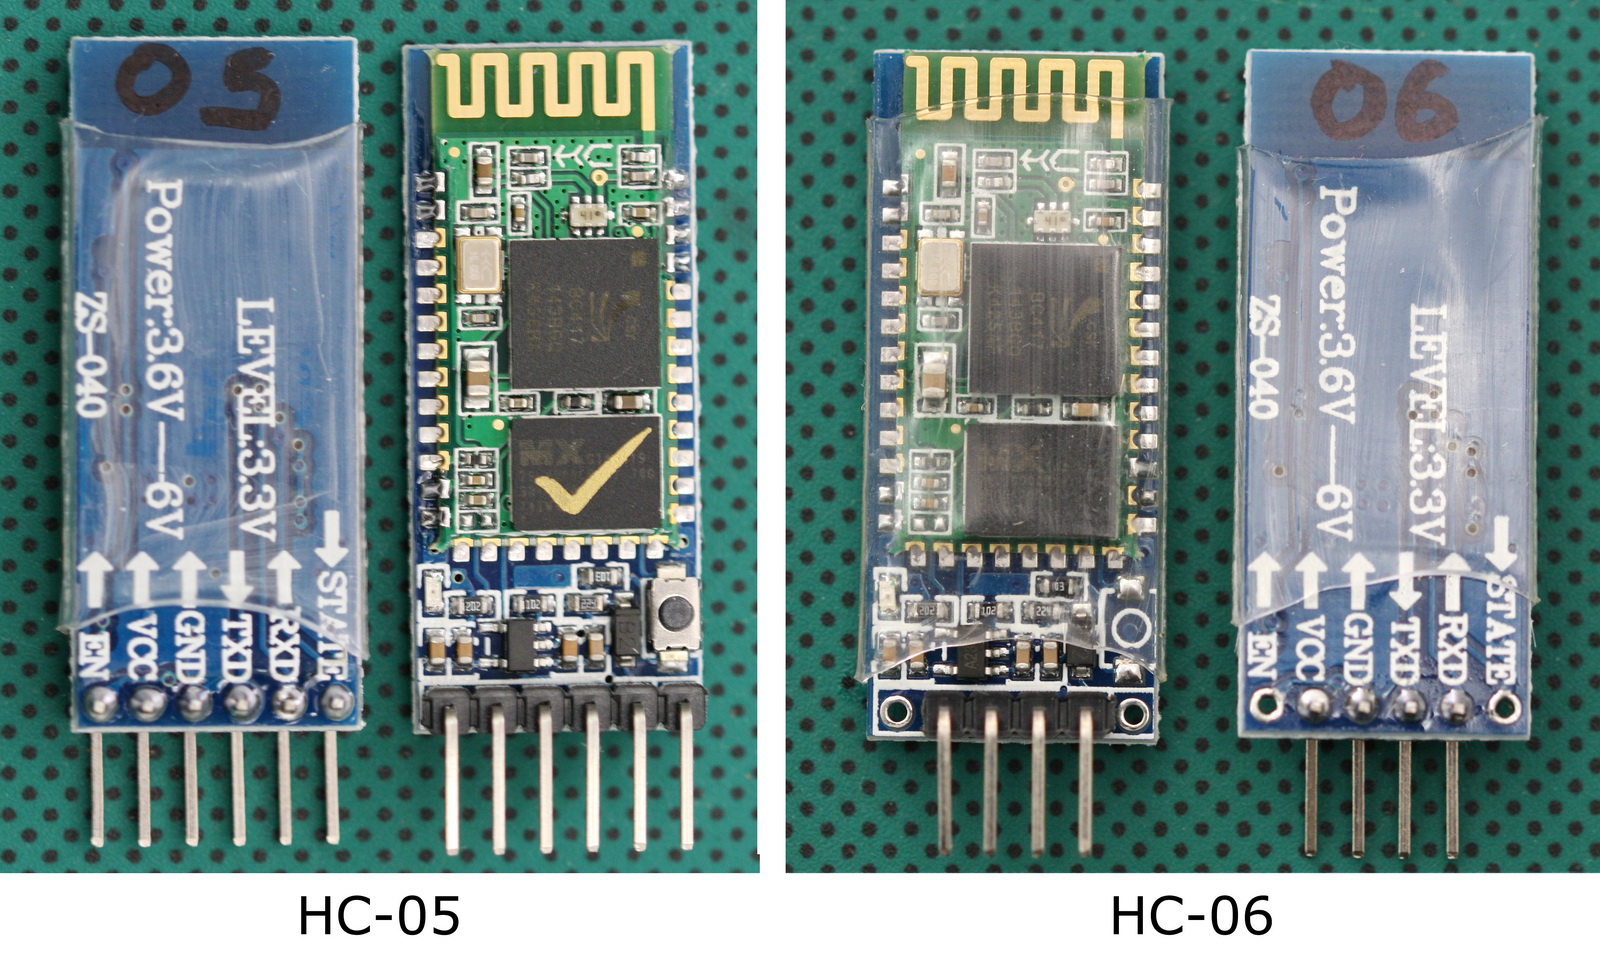 HC-05 and HC-06 zs-040 Bluetooth modules. First Look – Martyn Currey